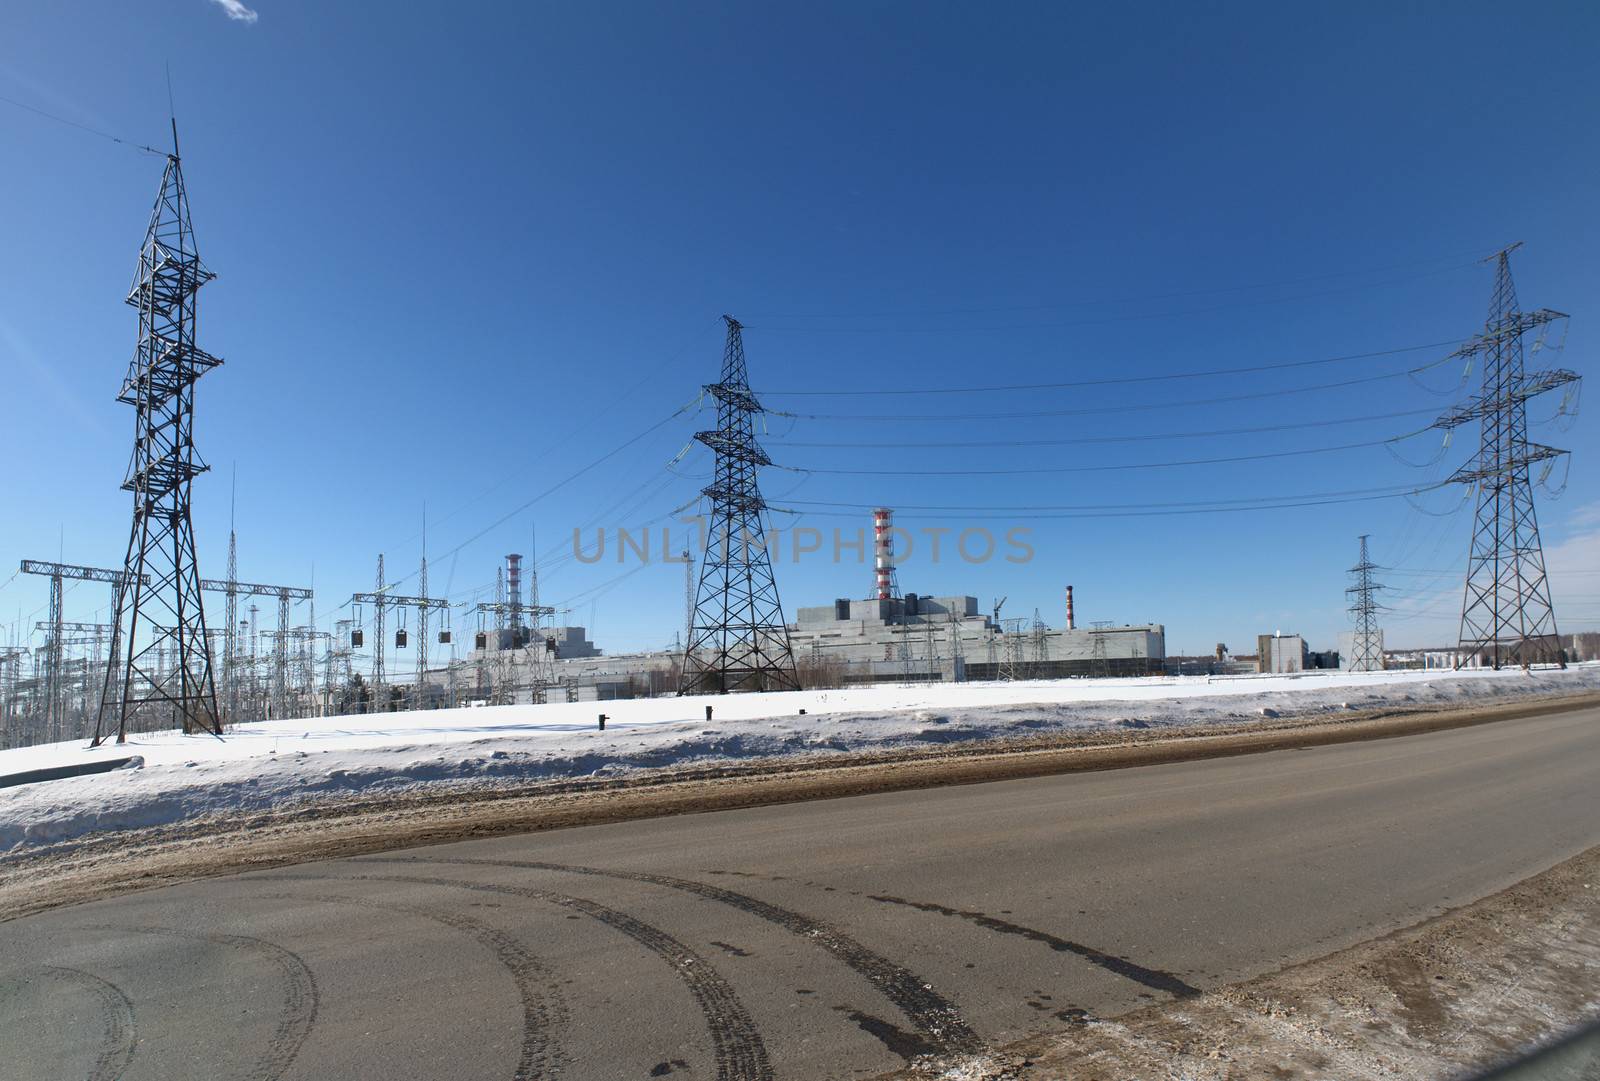 Nuclear power plant and power lines in the winter